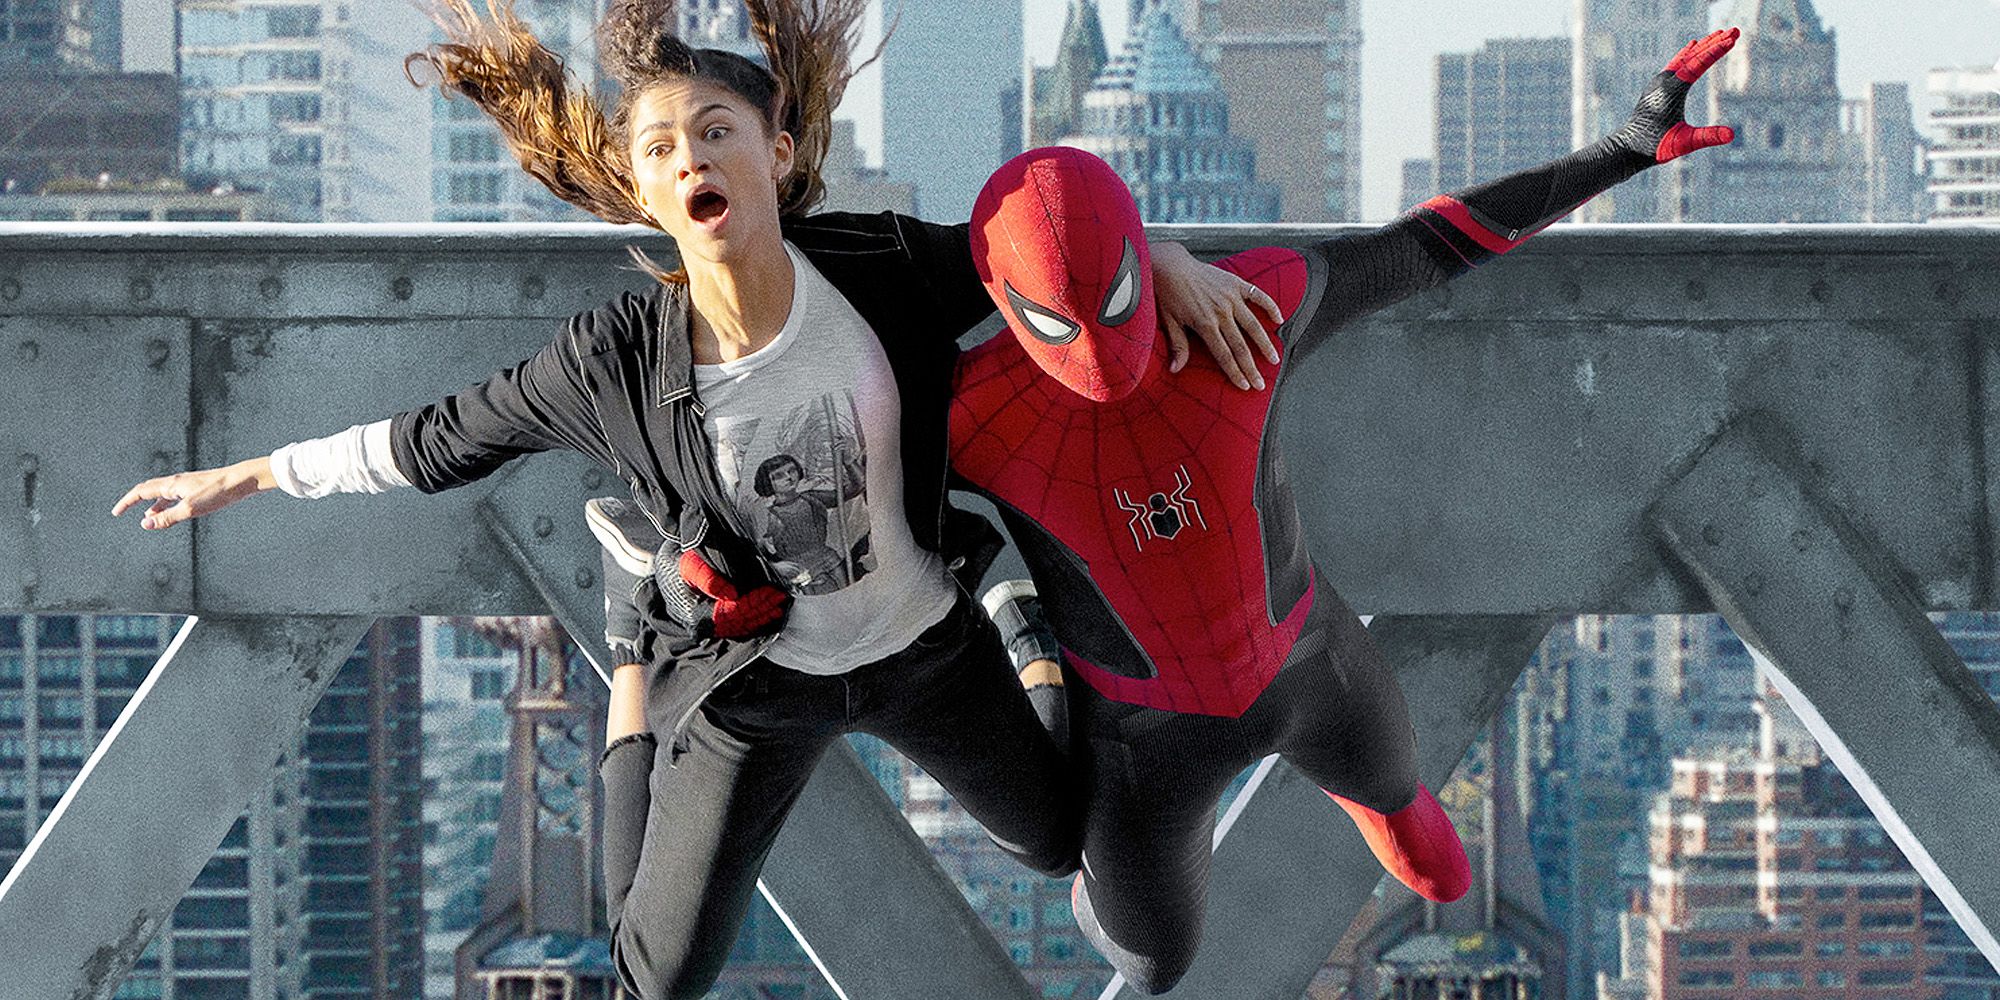 Spider Man: No Way Home Image Expand On Key Moments